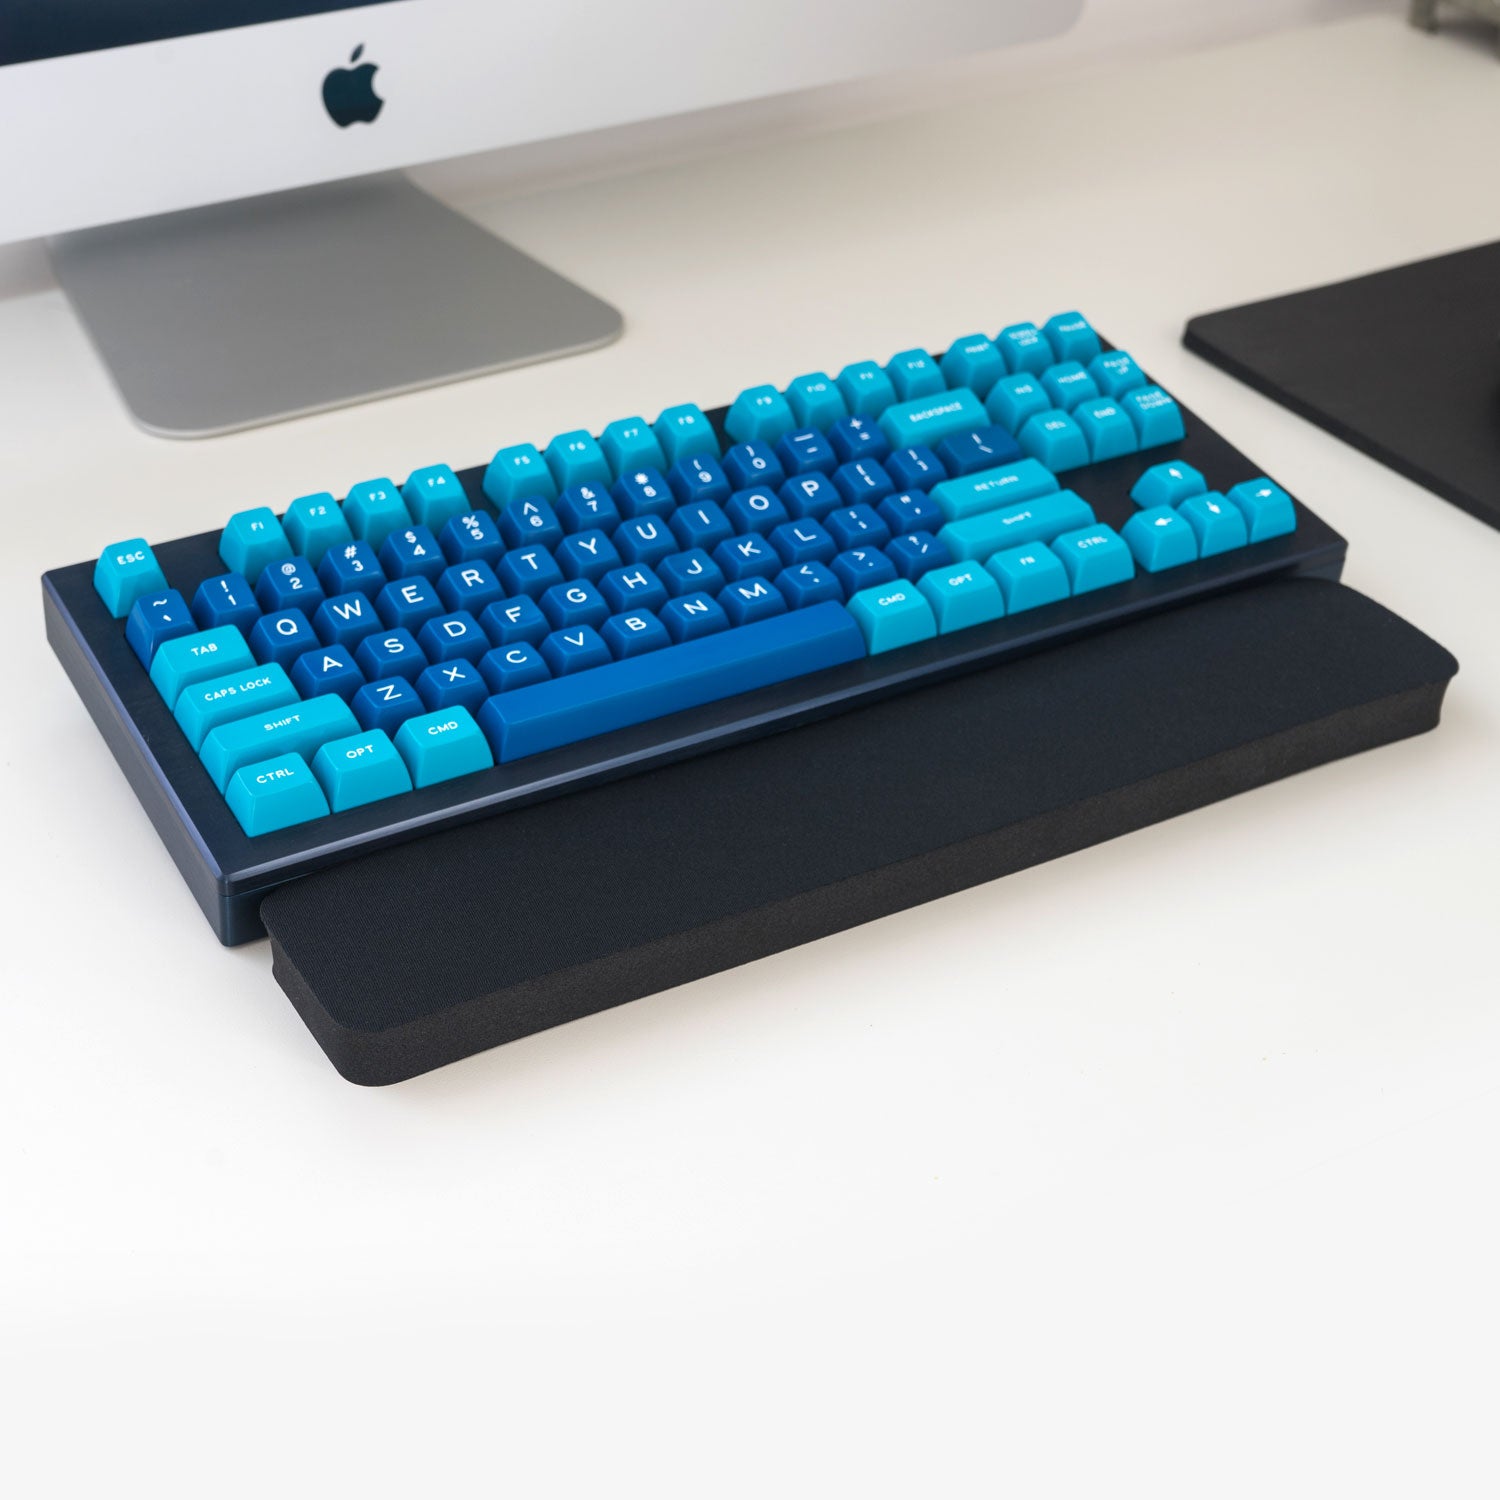 Grifiti Fat Wrist Pad 17 Inch for Standard and Mechanical Keyboards